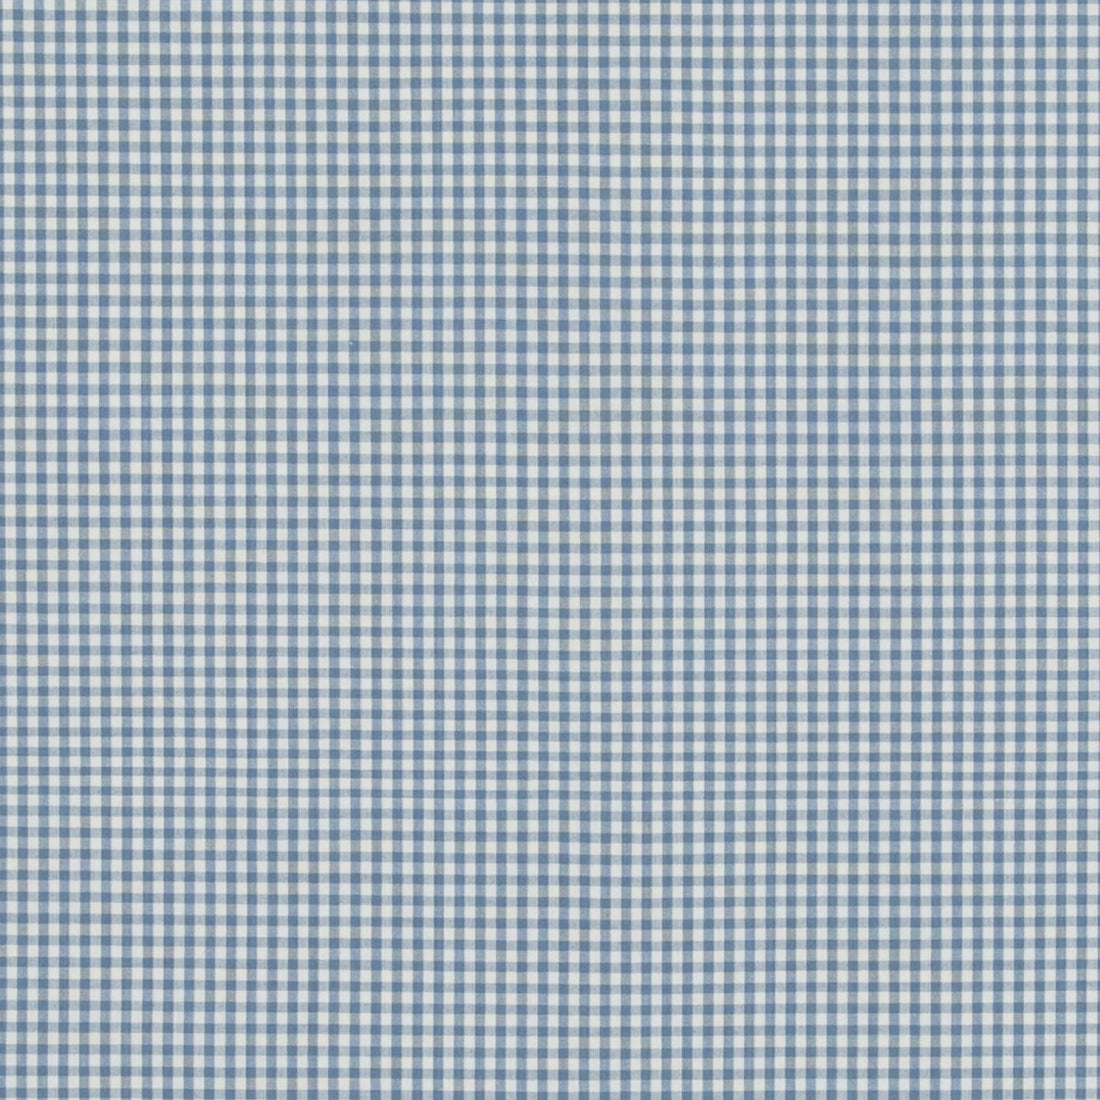 Sherborne Gingham fabric in soft blue color - pattern PF50506.605.0 - by Baker Lifestyle in the Bridport collection